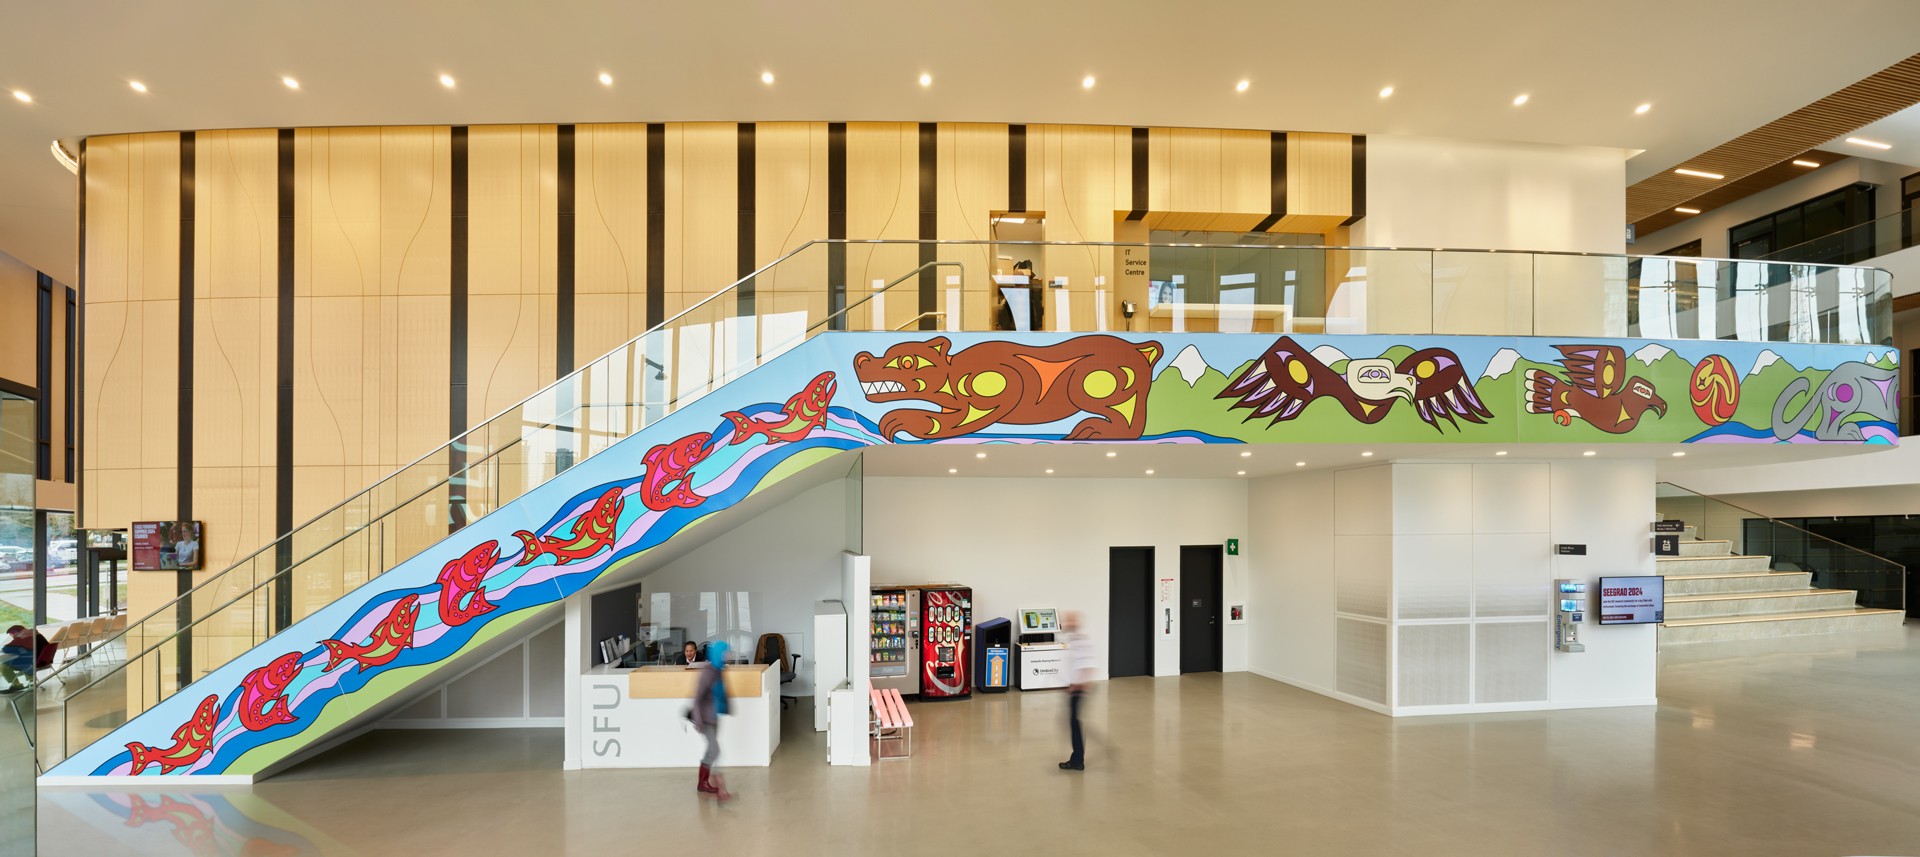 Indigenous artwork along a staircase in an open atrium. The artwork depicts a stream of fish meeting a bear. Next to it, there is are eagles soaring around the sun and a wolf. 